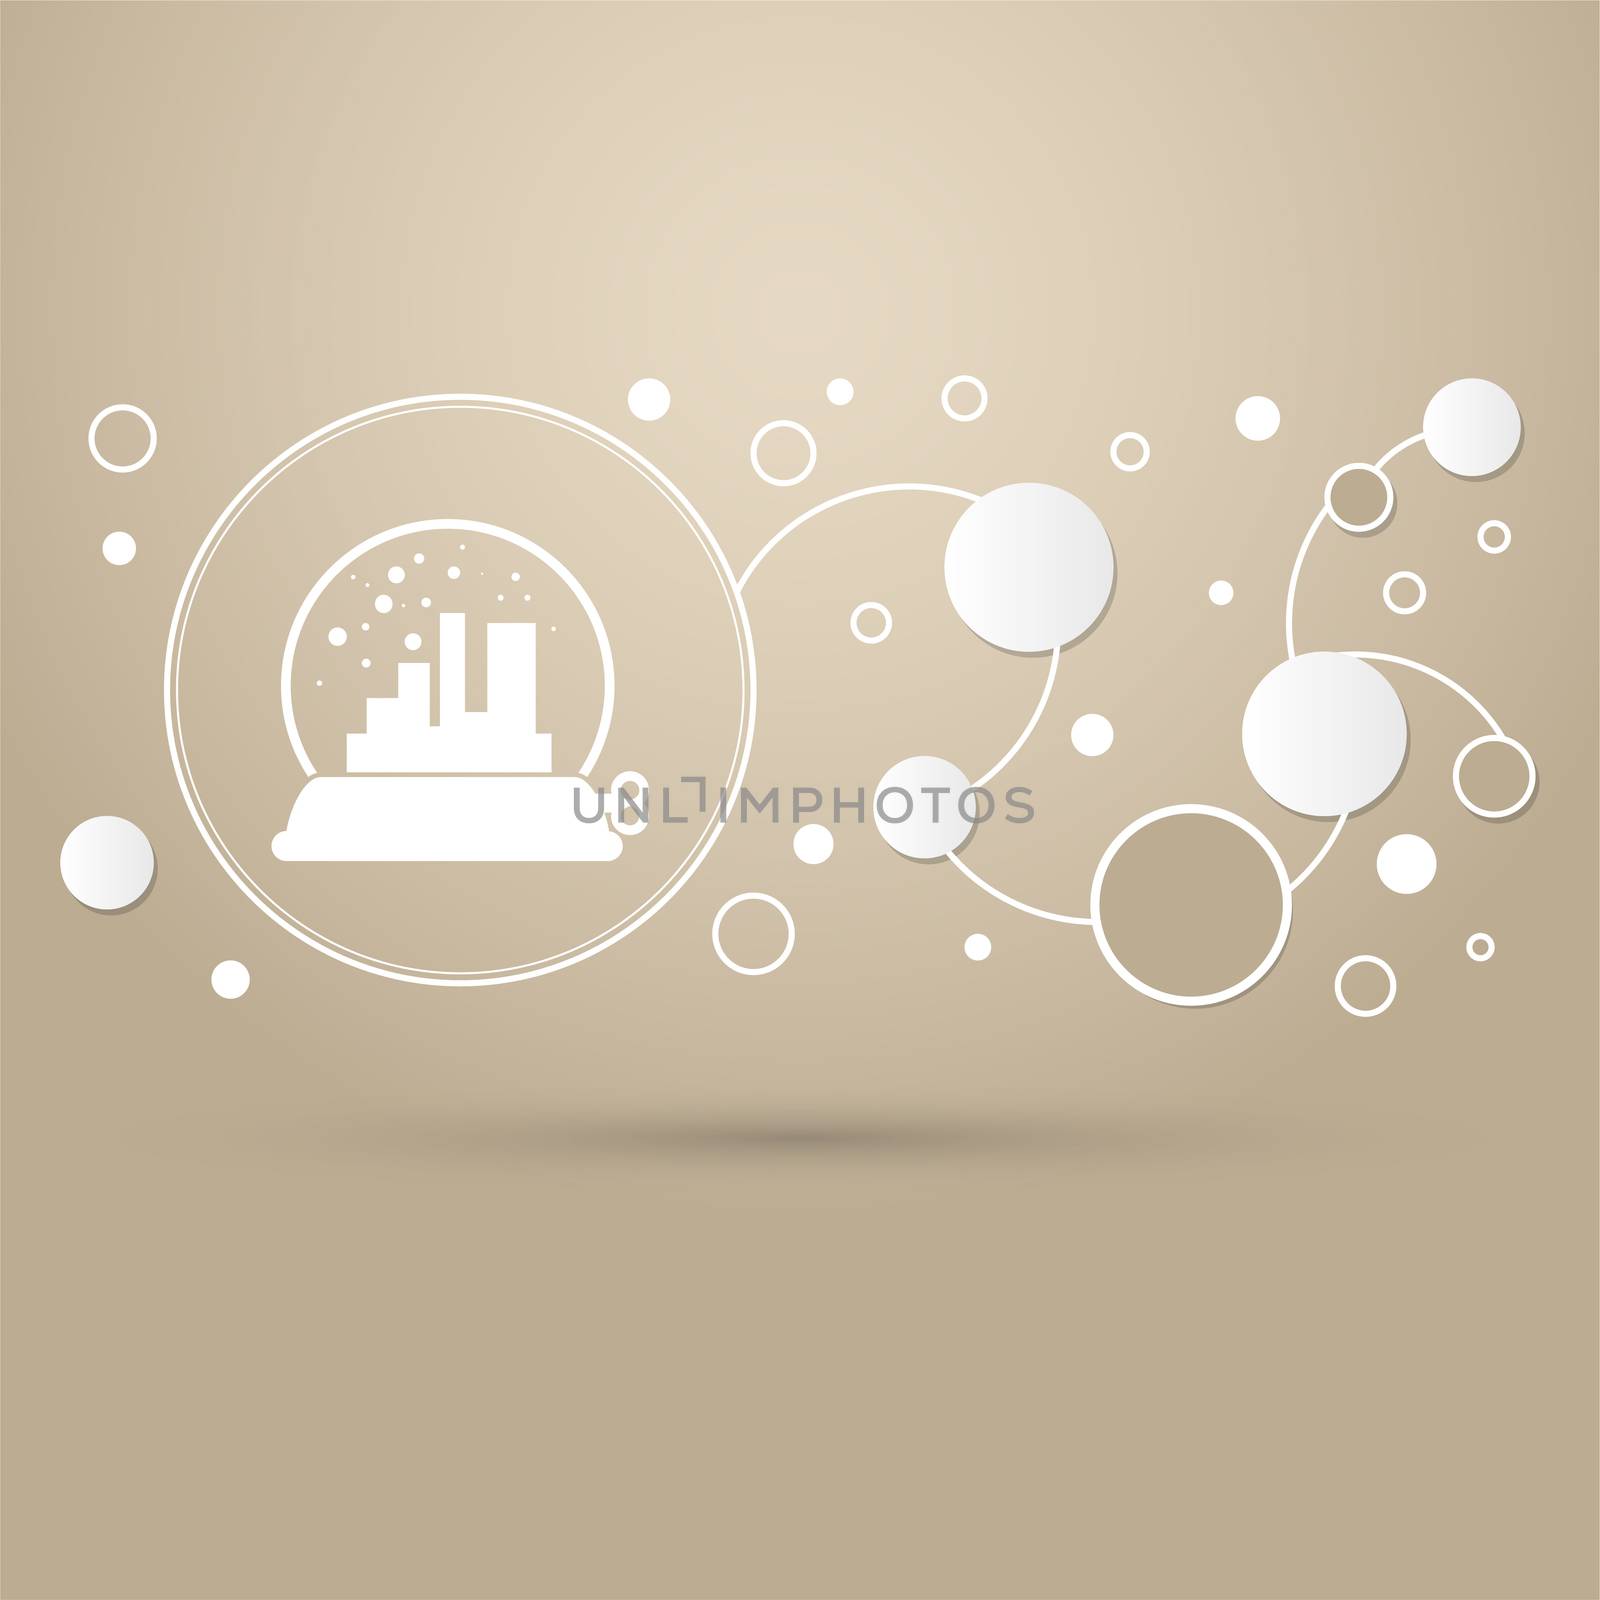 factory icon on a brown background with elegant style and modern design infographic.  by Adamchuk